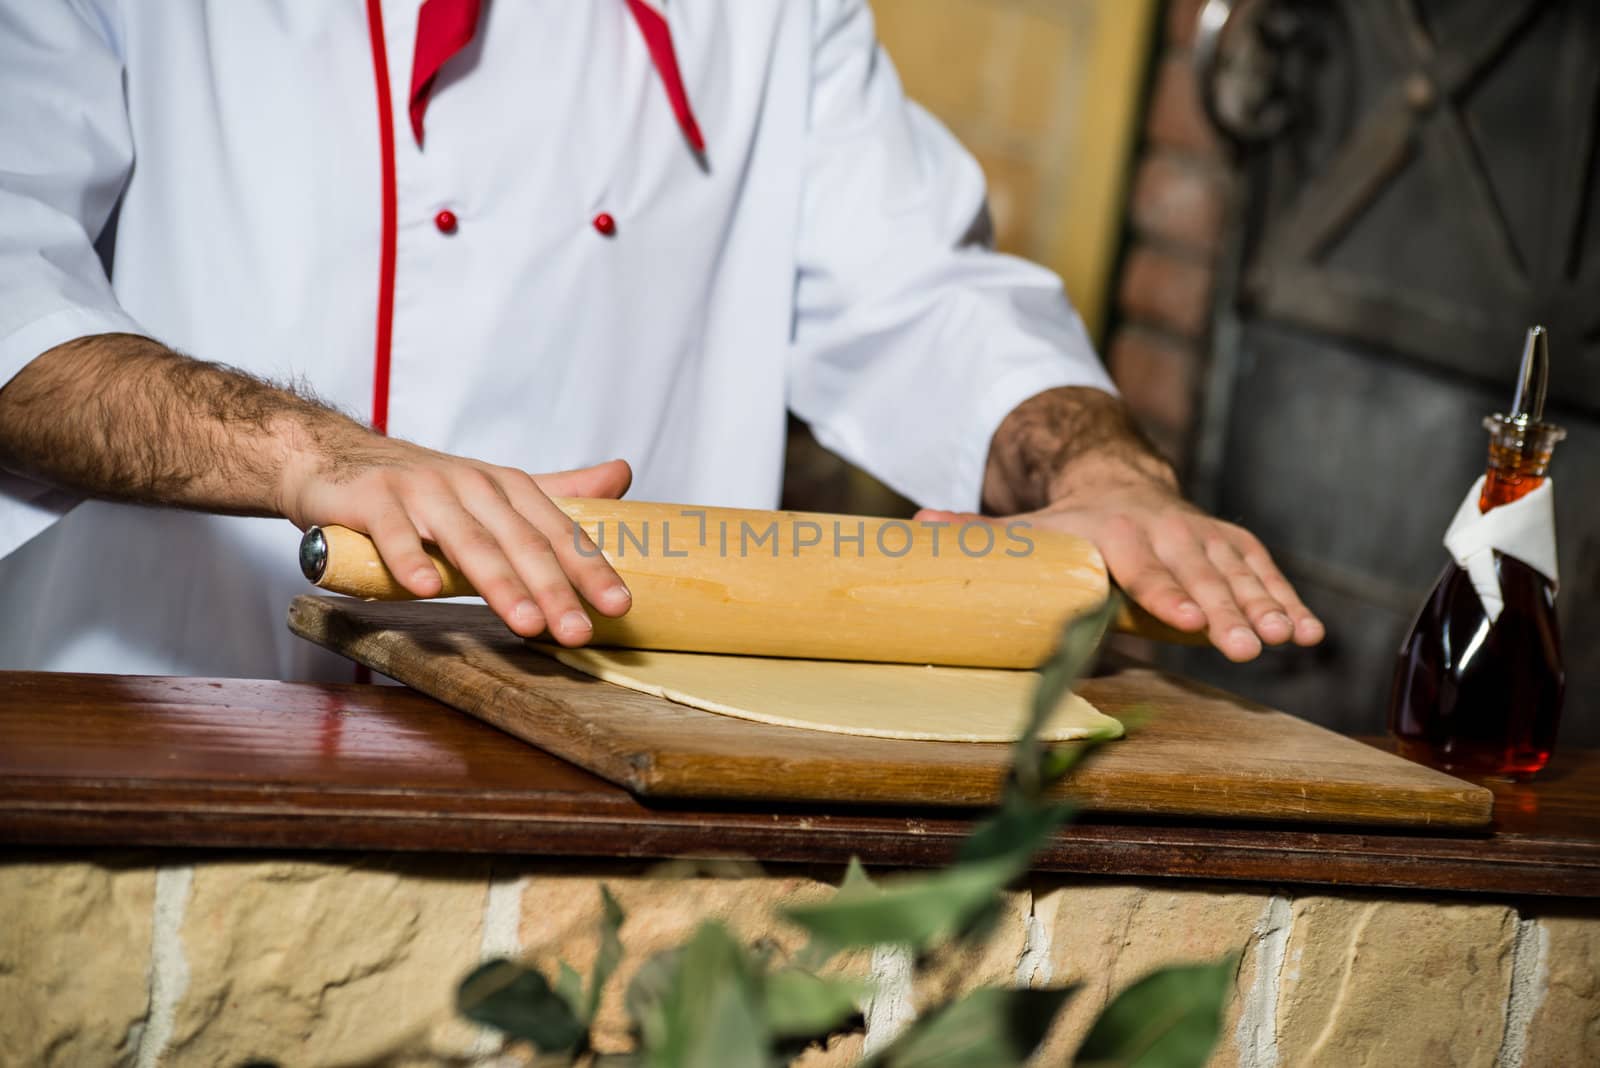 Cook rolls out the dough on a board, the traditional cooking